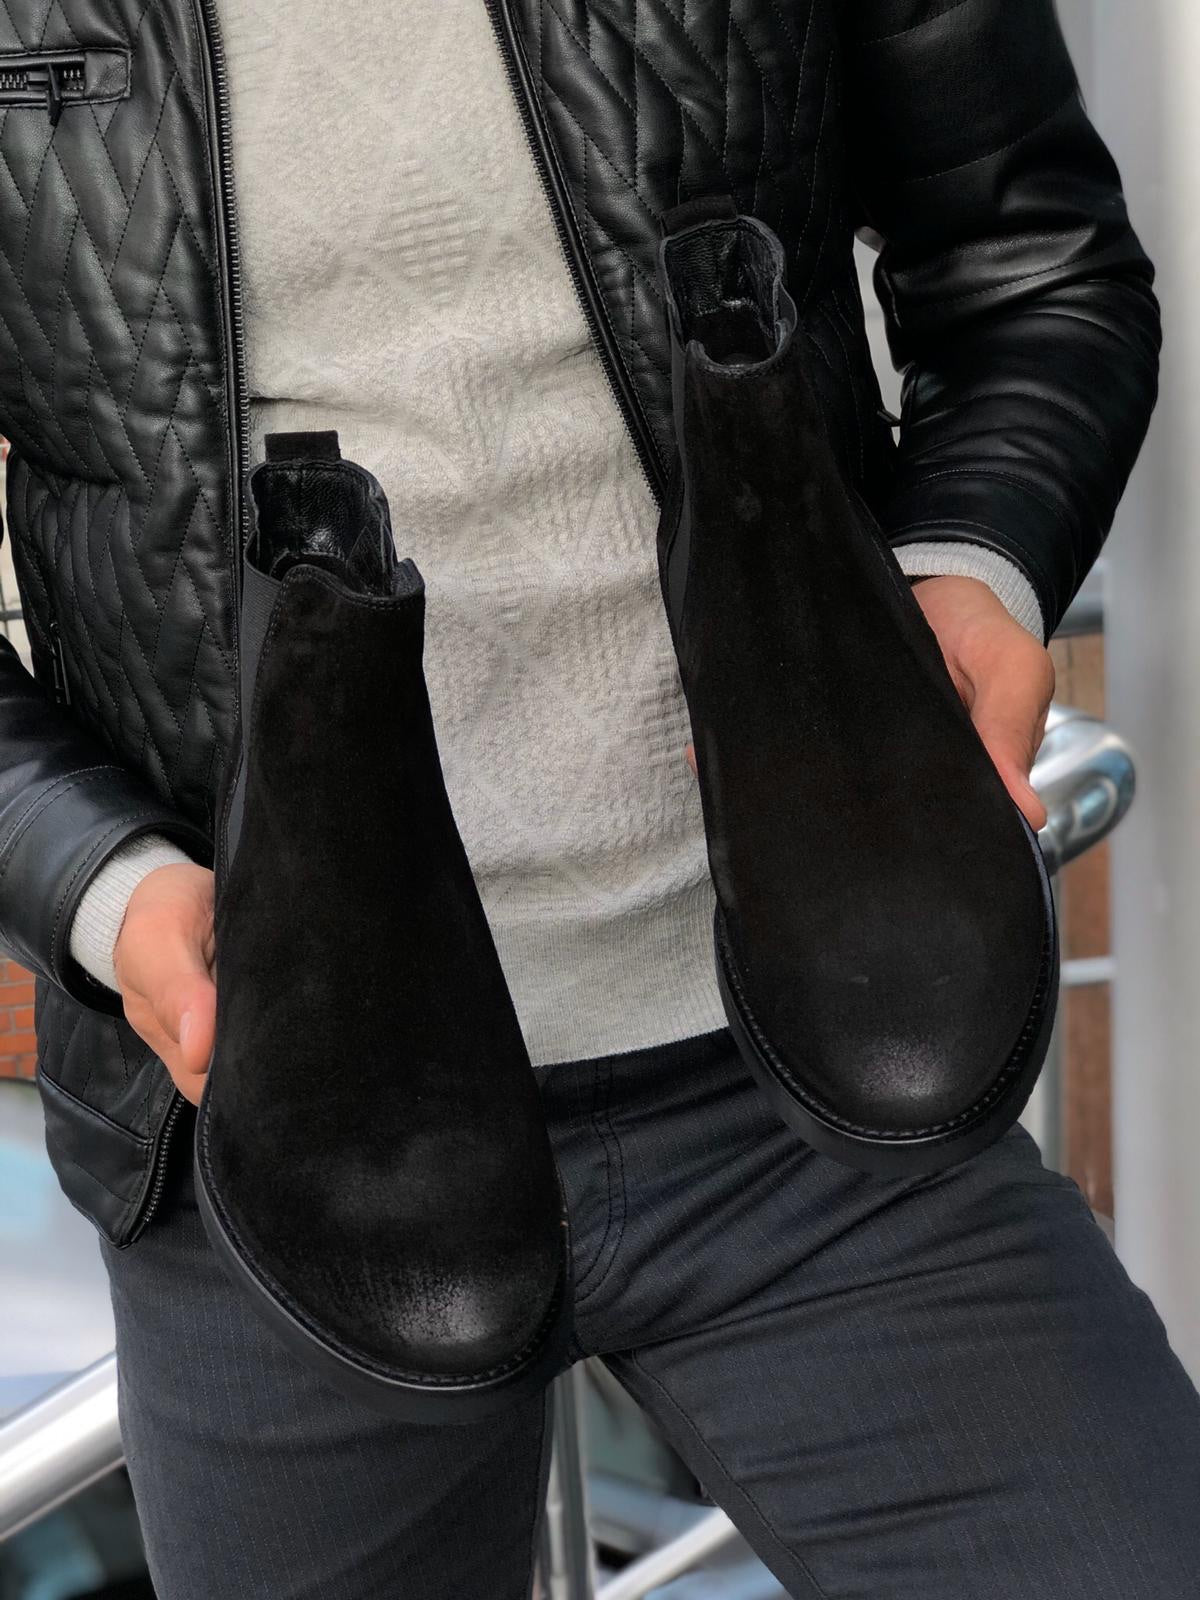 The Aqua Black Suede Leather Chelsea Boots